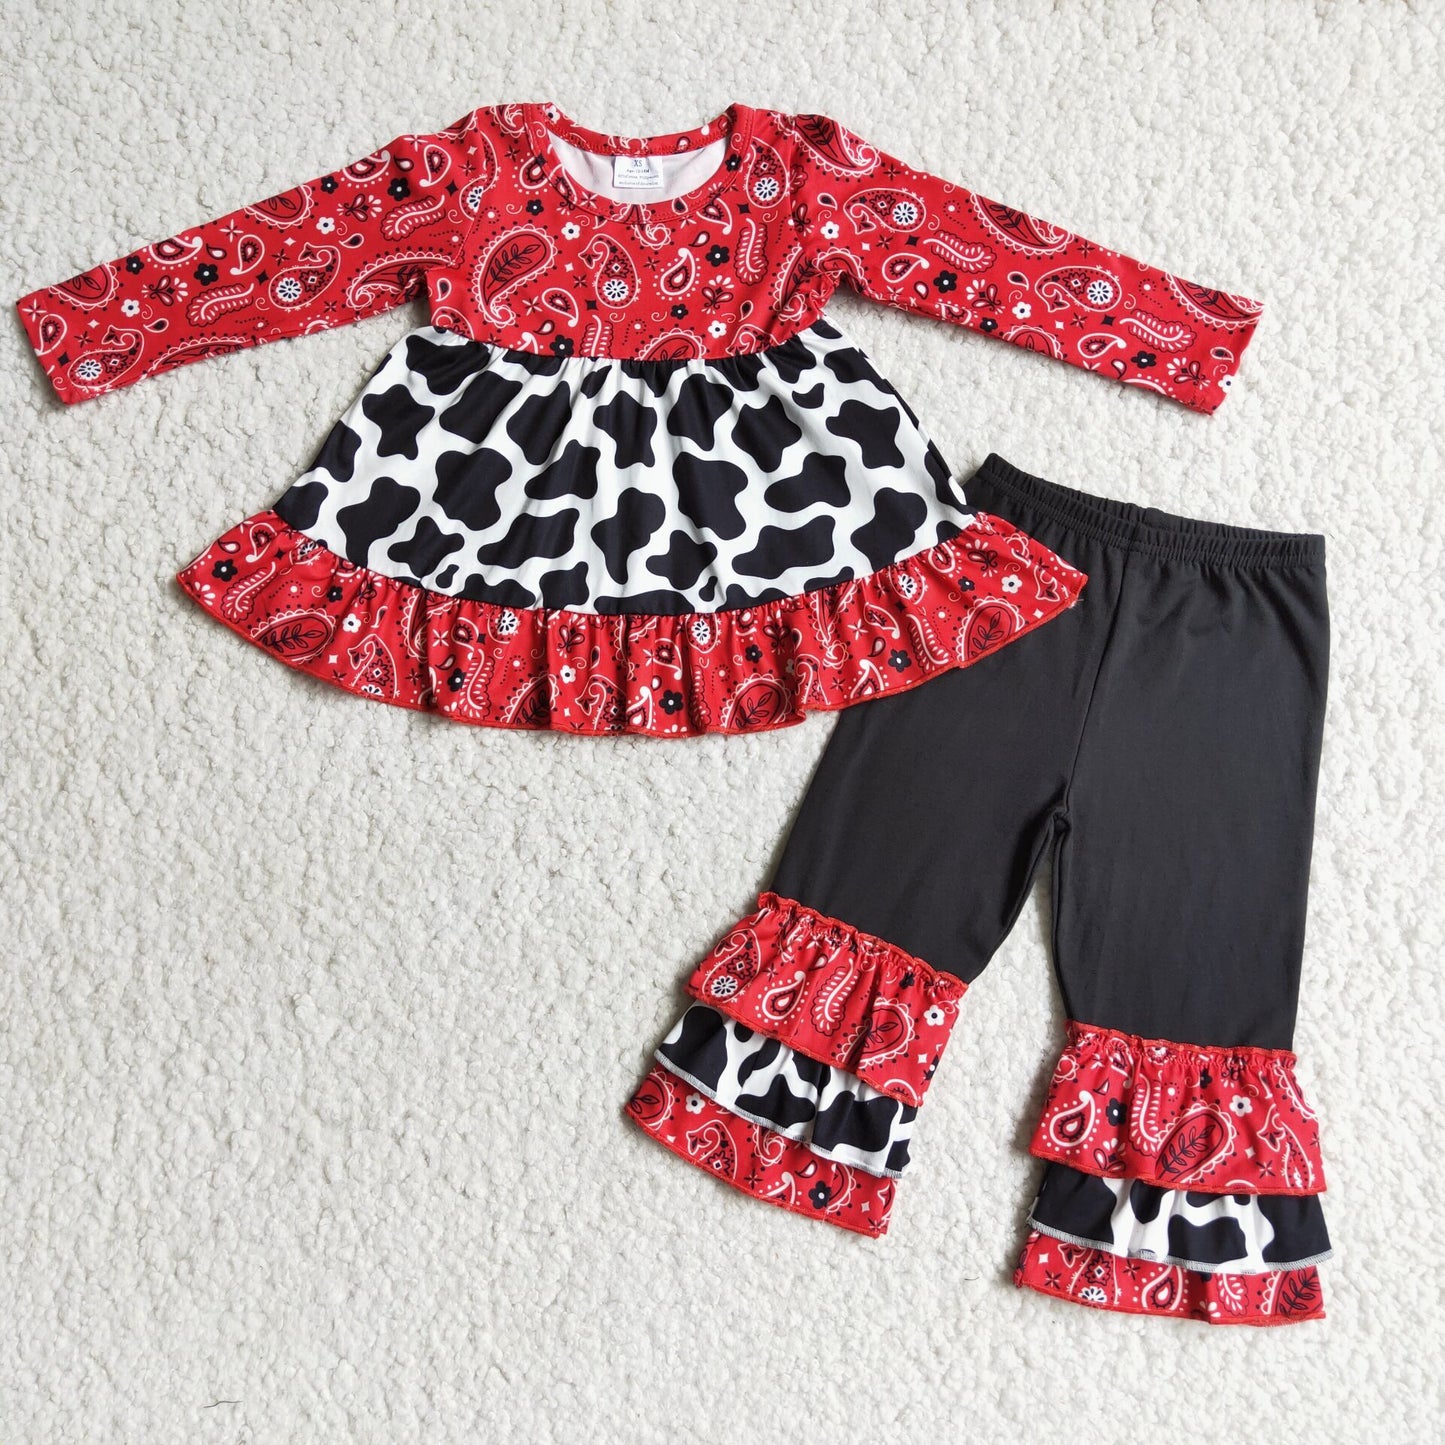 red cowgirl ruffle outfits